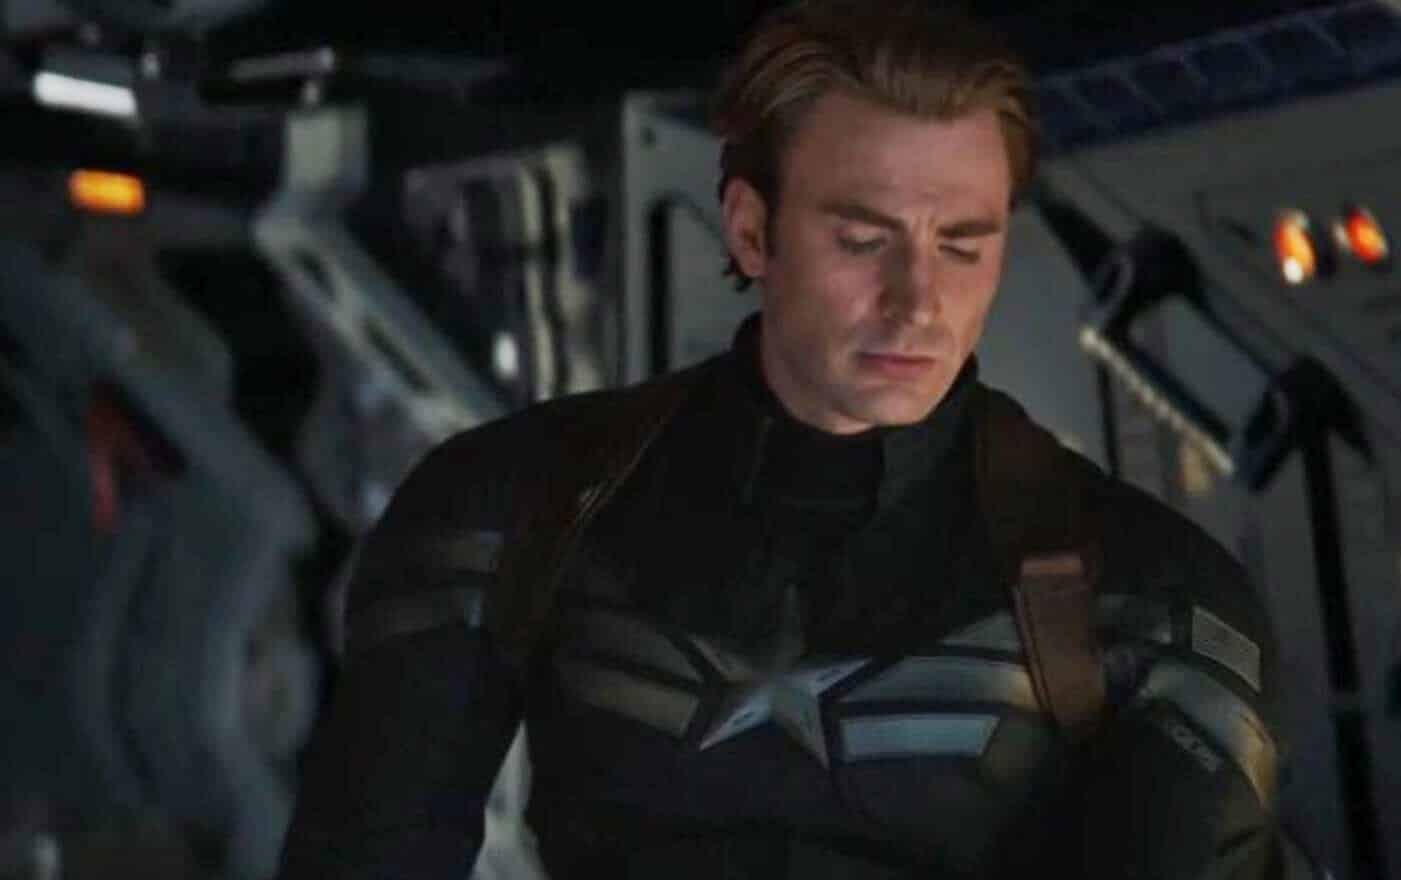 'Avengers: Endgame' Early UK Release Date Is Being Overblown